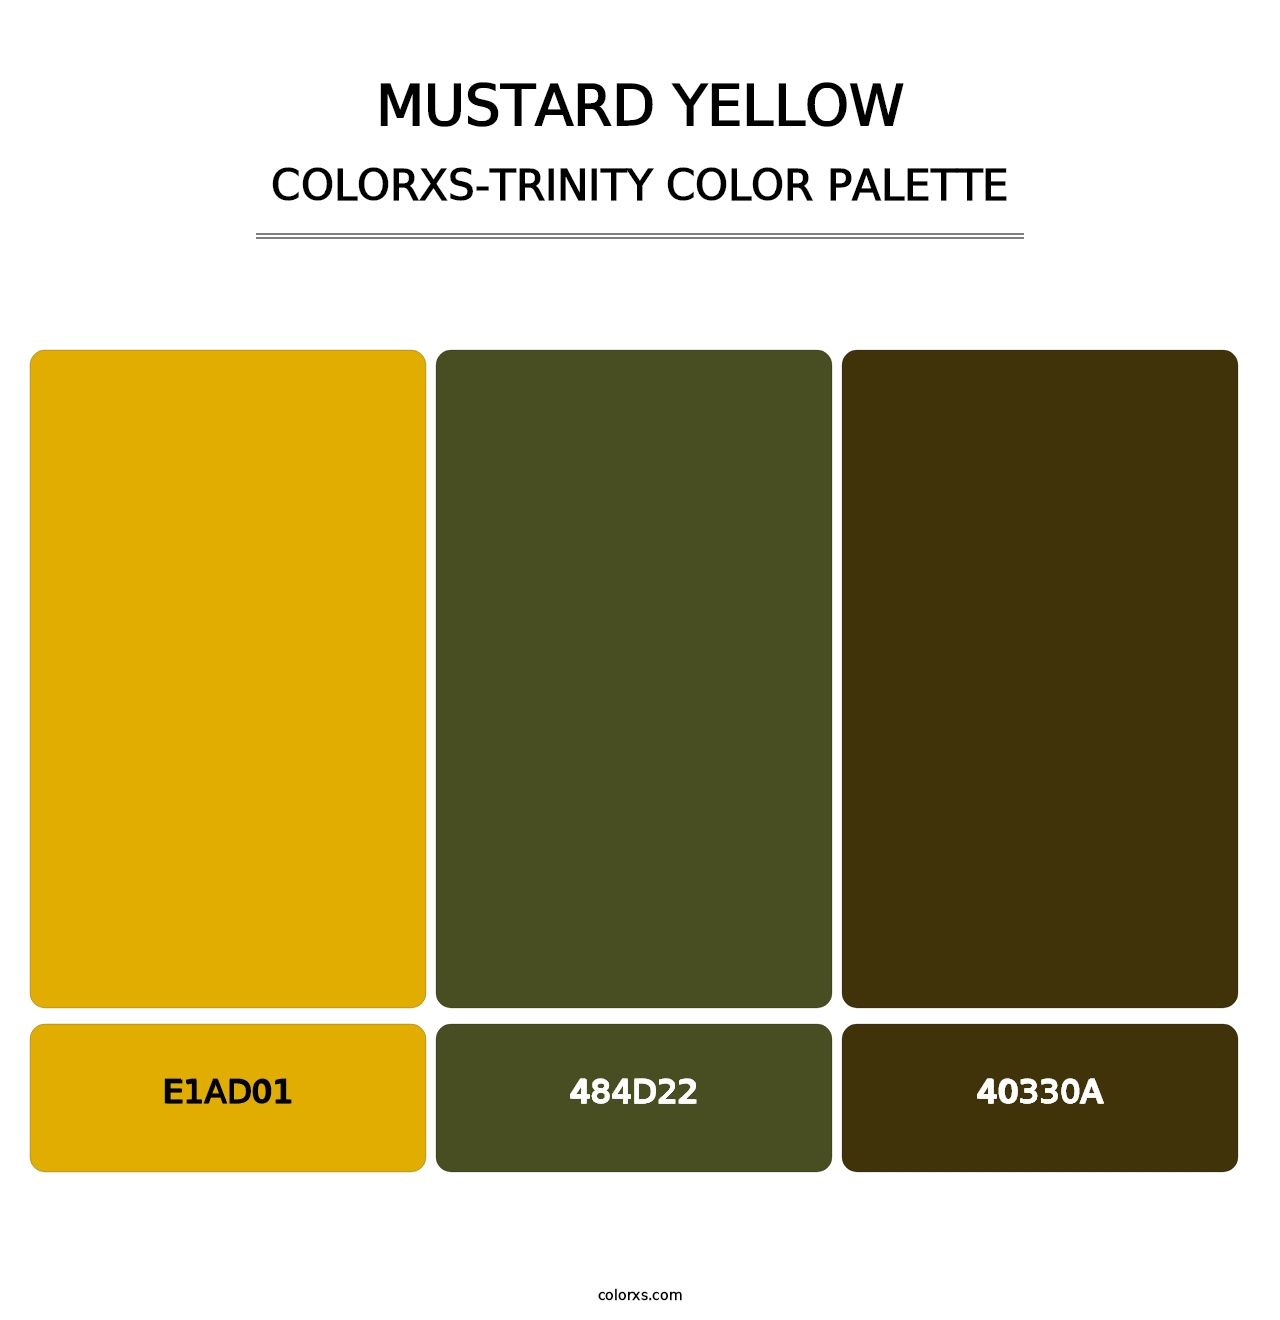 Mustard Yellow - Colorxs Trinity Palette